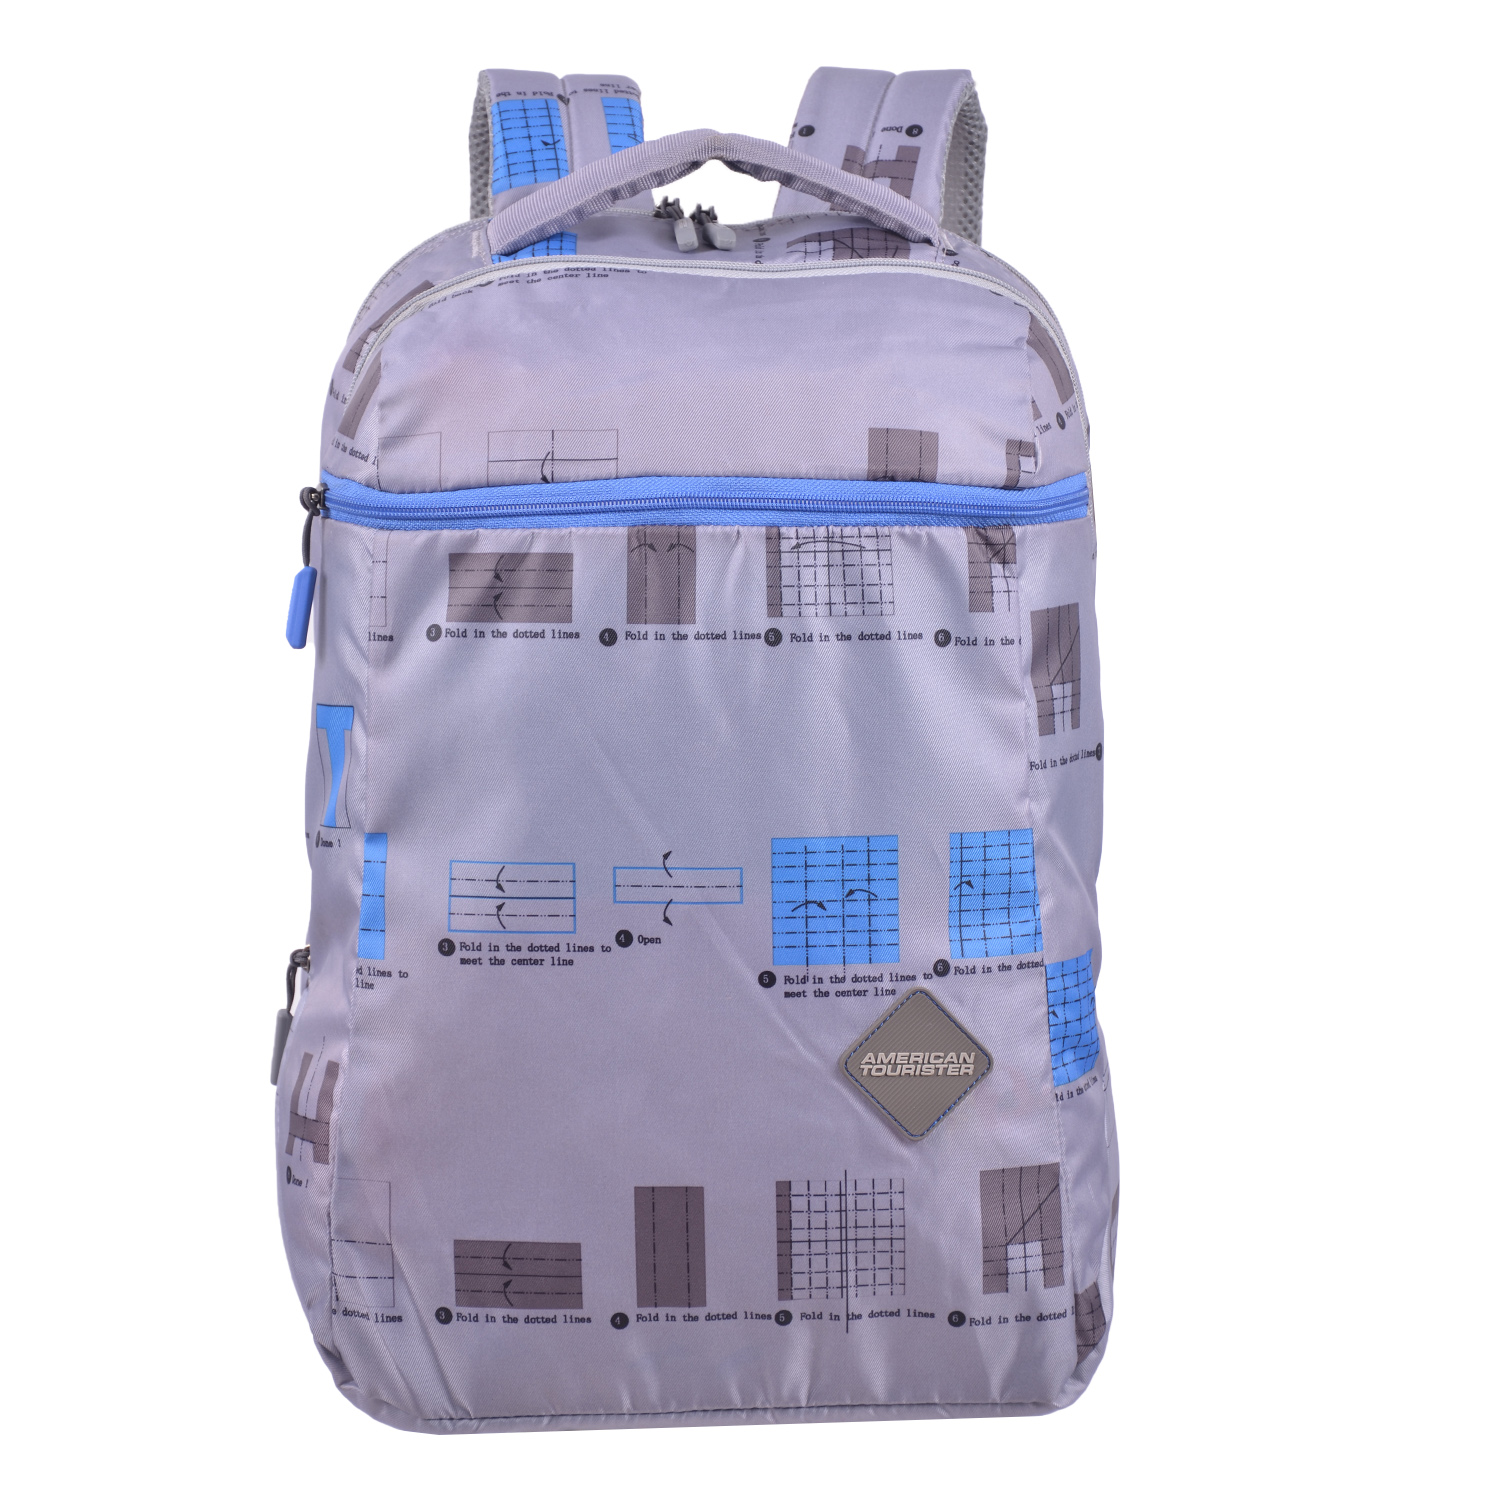 RoshanBags_AMERICAN TOURISTER 25L ALEO 01 BACKPACK GREY